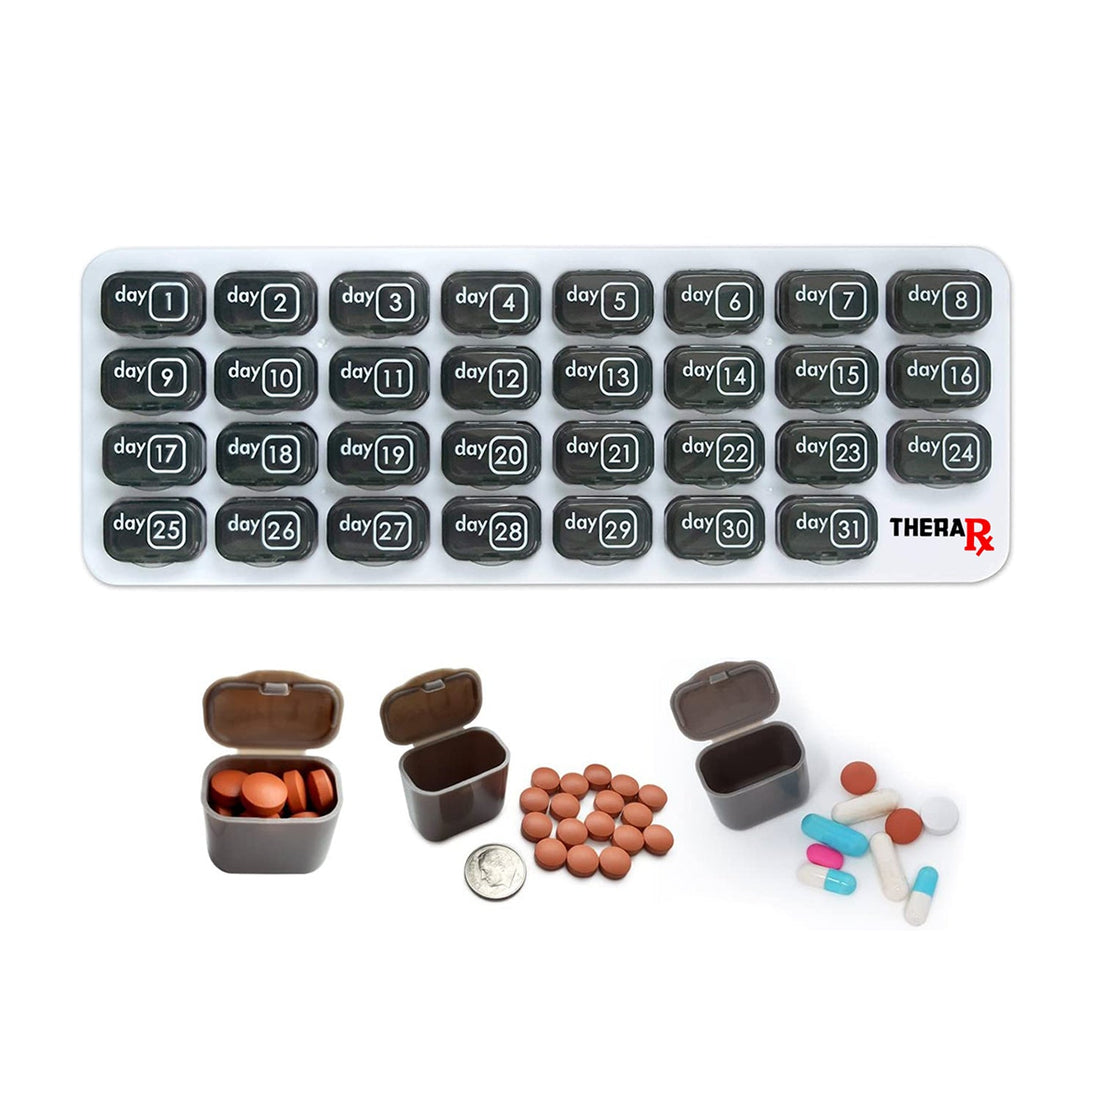 Thera Rx 31 Day Monthly Pill Organizer